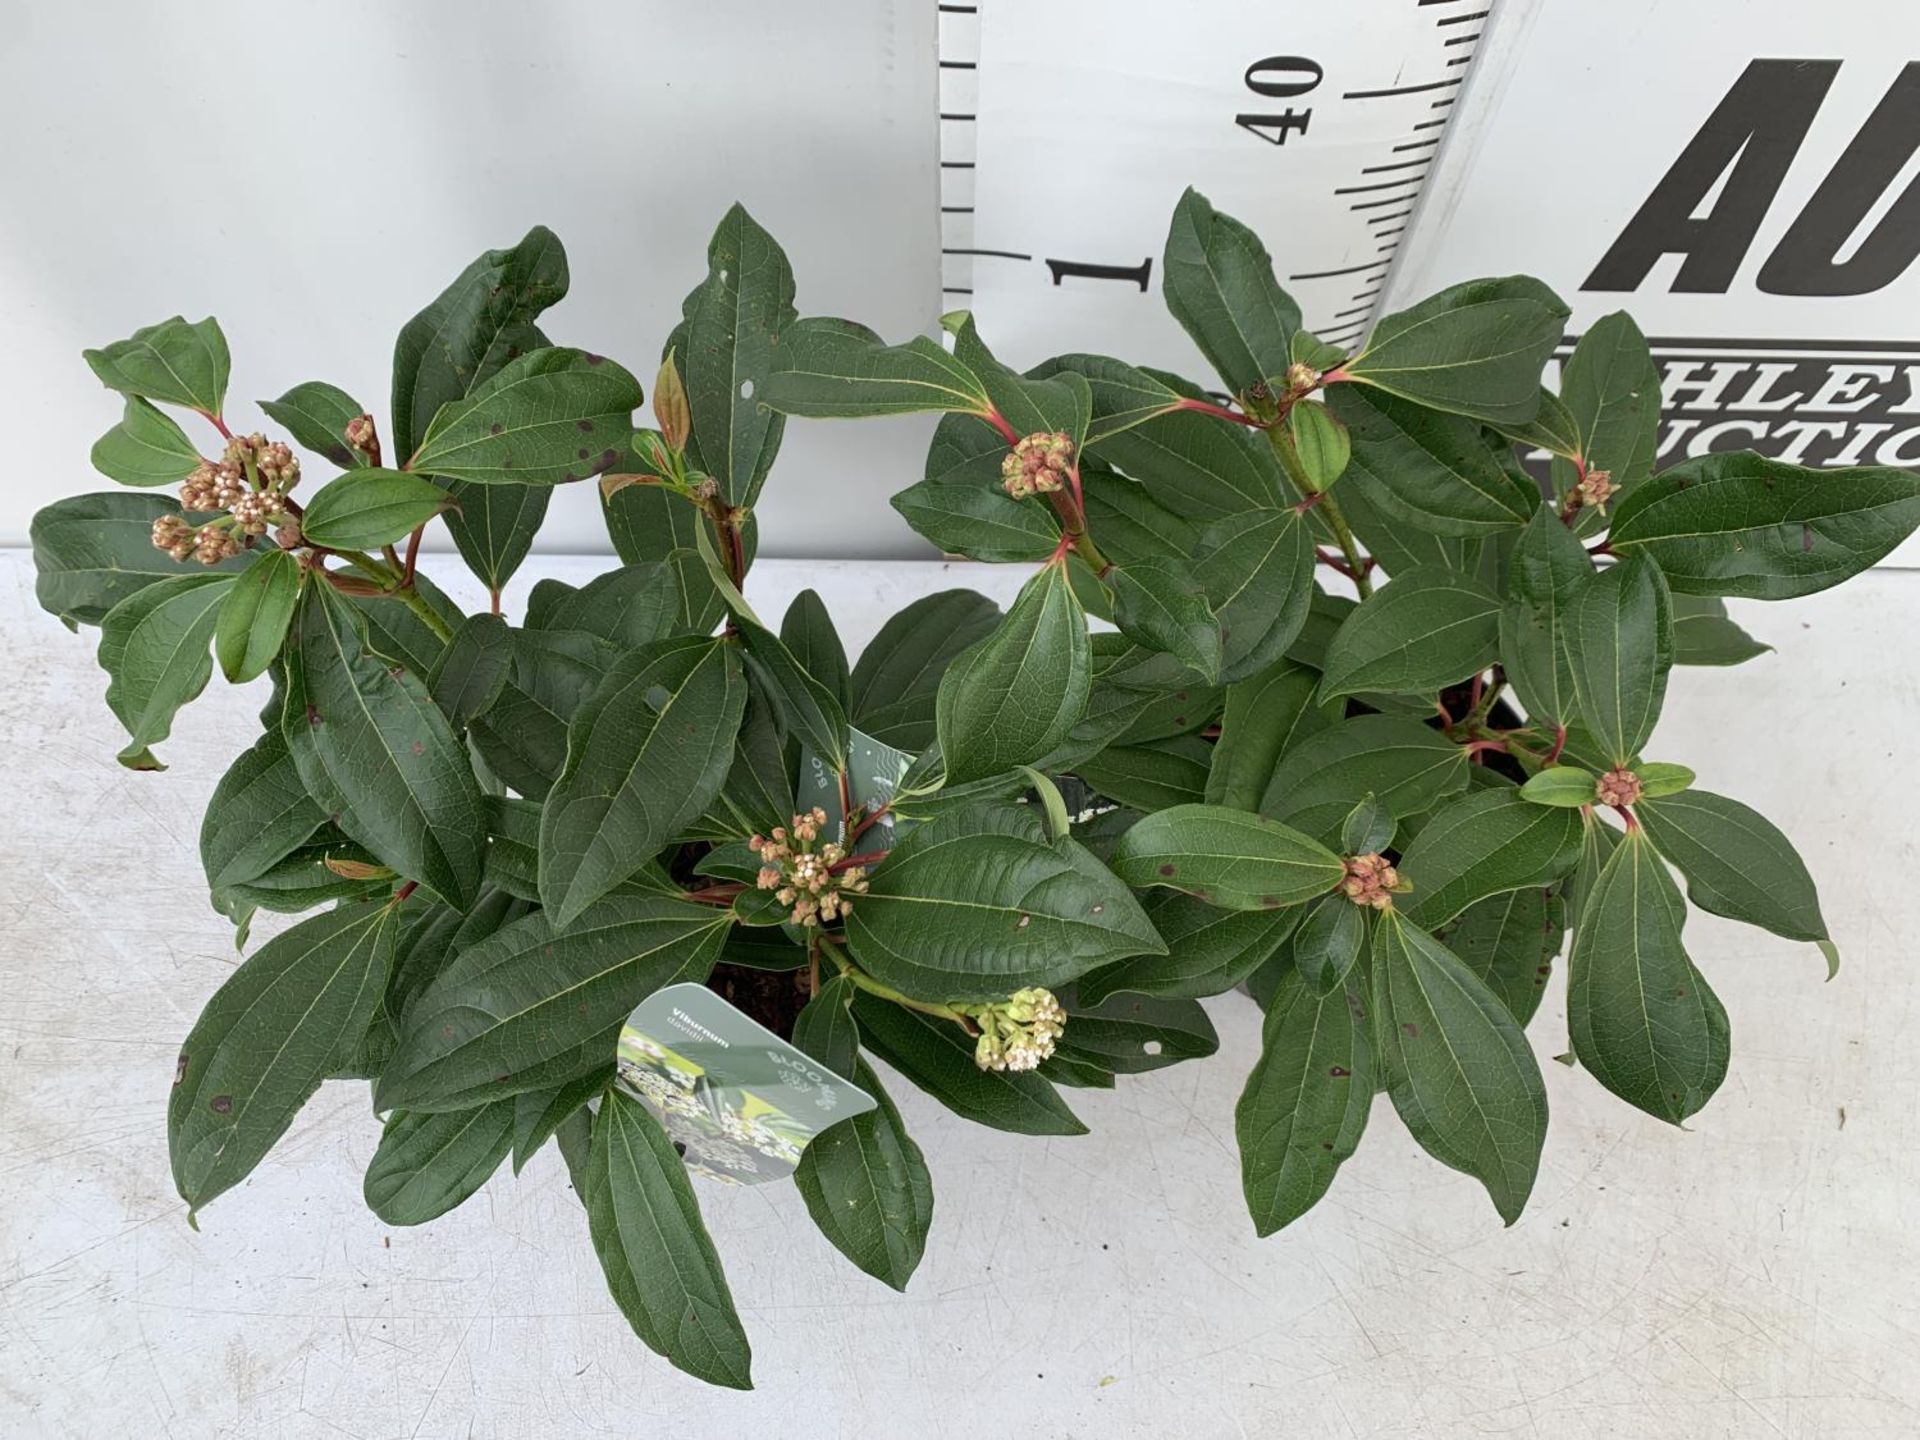 TWO VIBURNUM 'DAVIDII' IN 2LTR POTS APPROX 40CM IN HEIGHT TO BE SOLD FOR THE TWO PLUS VAT - Image 2 of 4